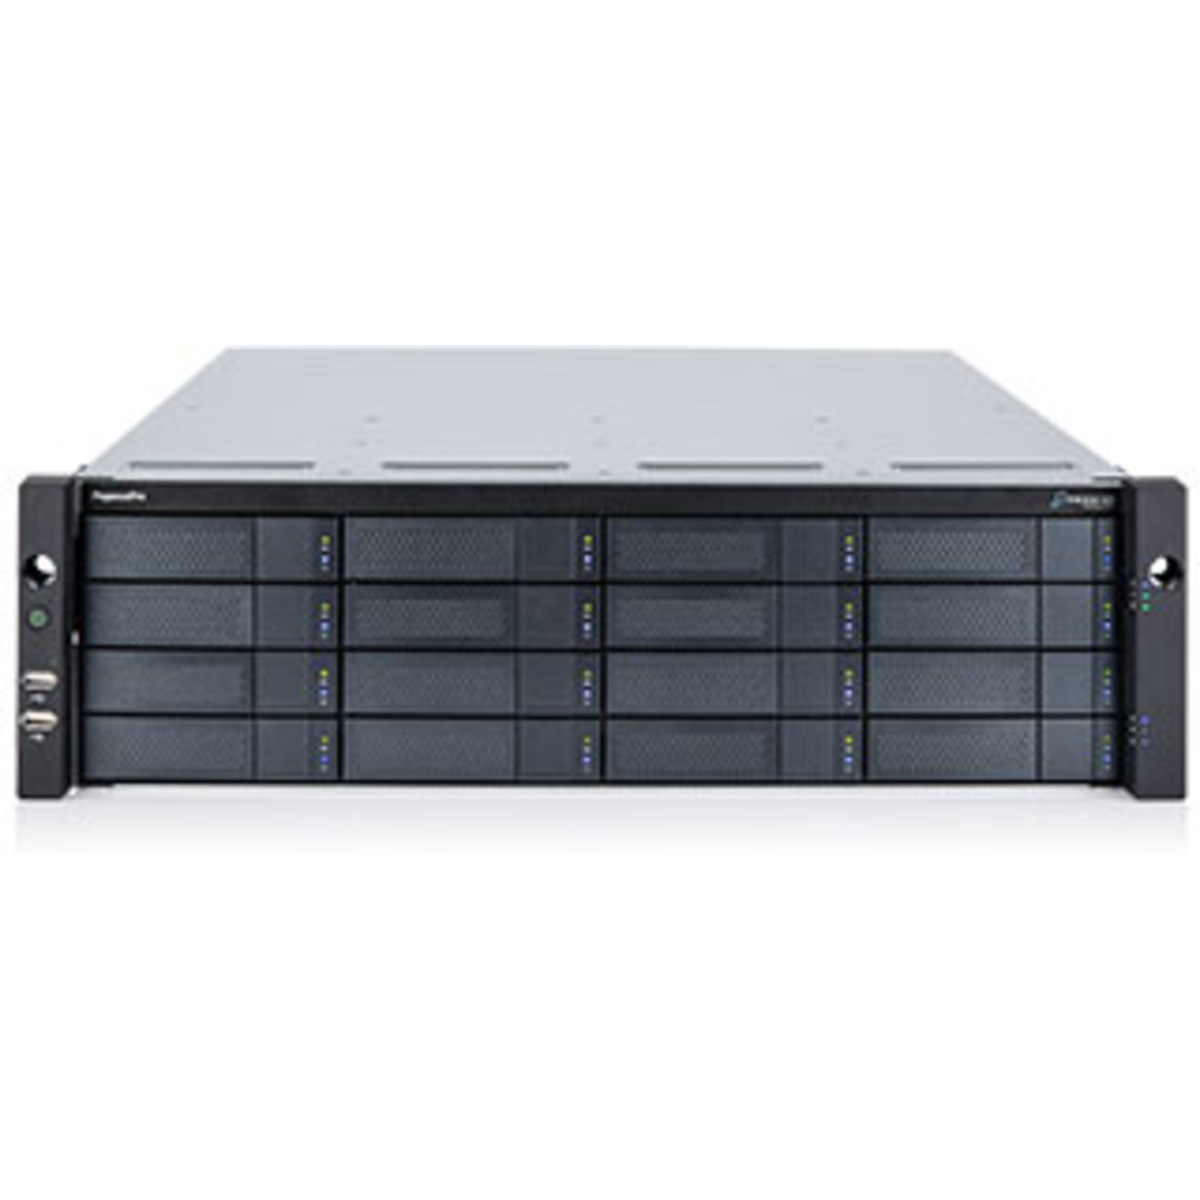 Promise Technology PegasusPro R16 22tb 16-Bay RackMount Multimedia / Power User / Business DAS-NAS - Combo Direct + Network Storage Device 11x2tb Western Digital Gold WD2005FBYZ 3.5 7200rpm SATA 6Gb/s HDD ENTERPRISE Class Drives Installed - Burn-In Tested PegasusPro R16